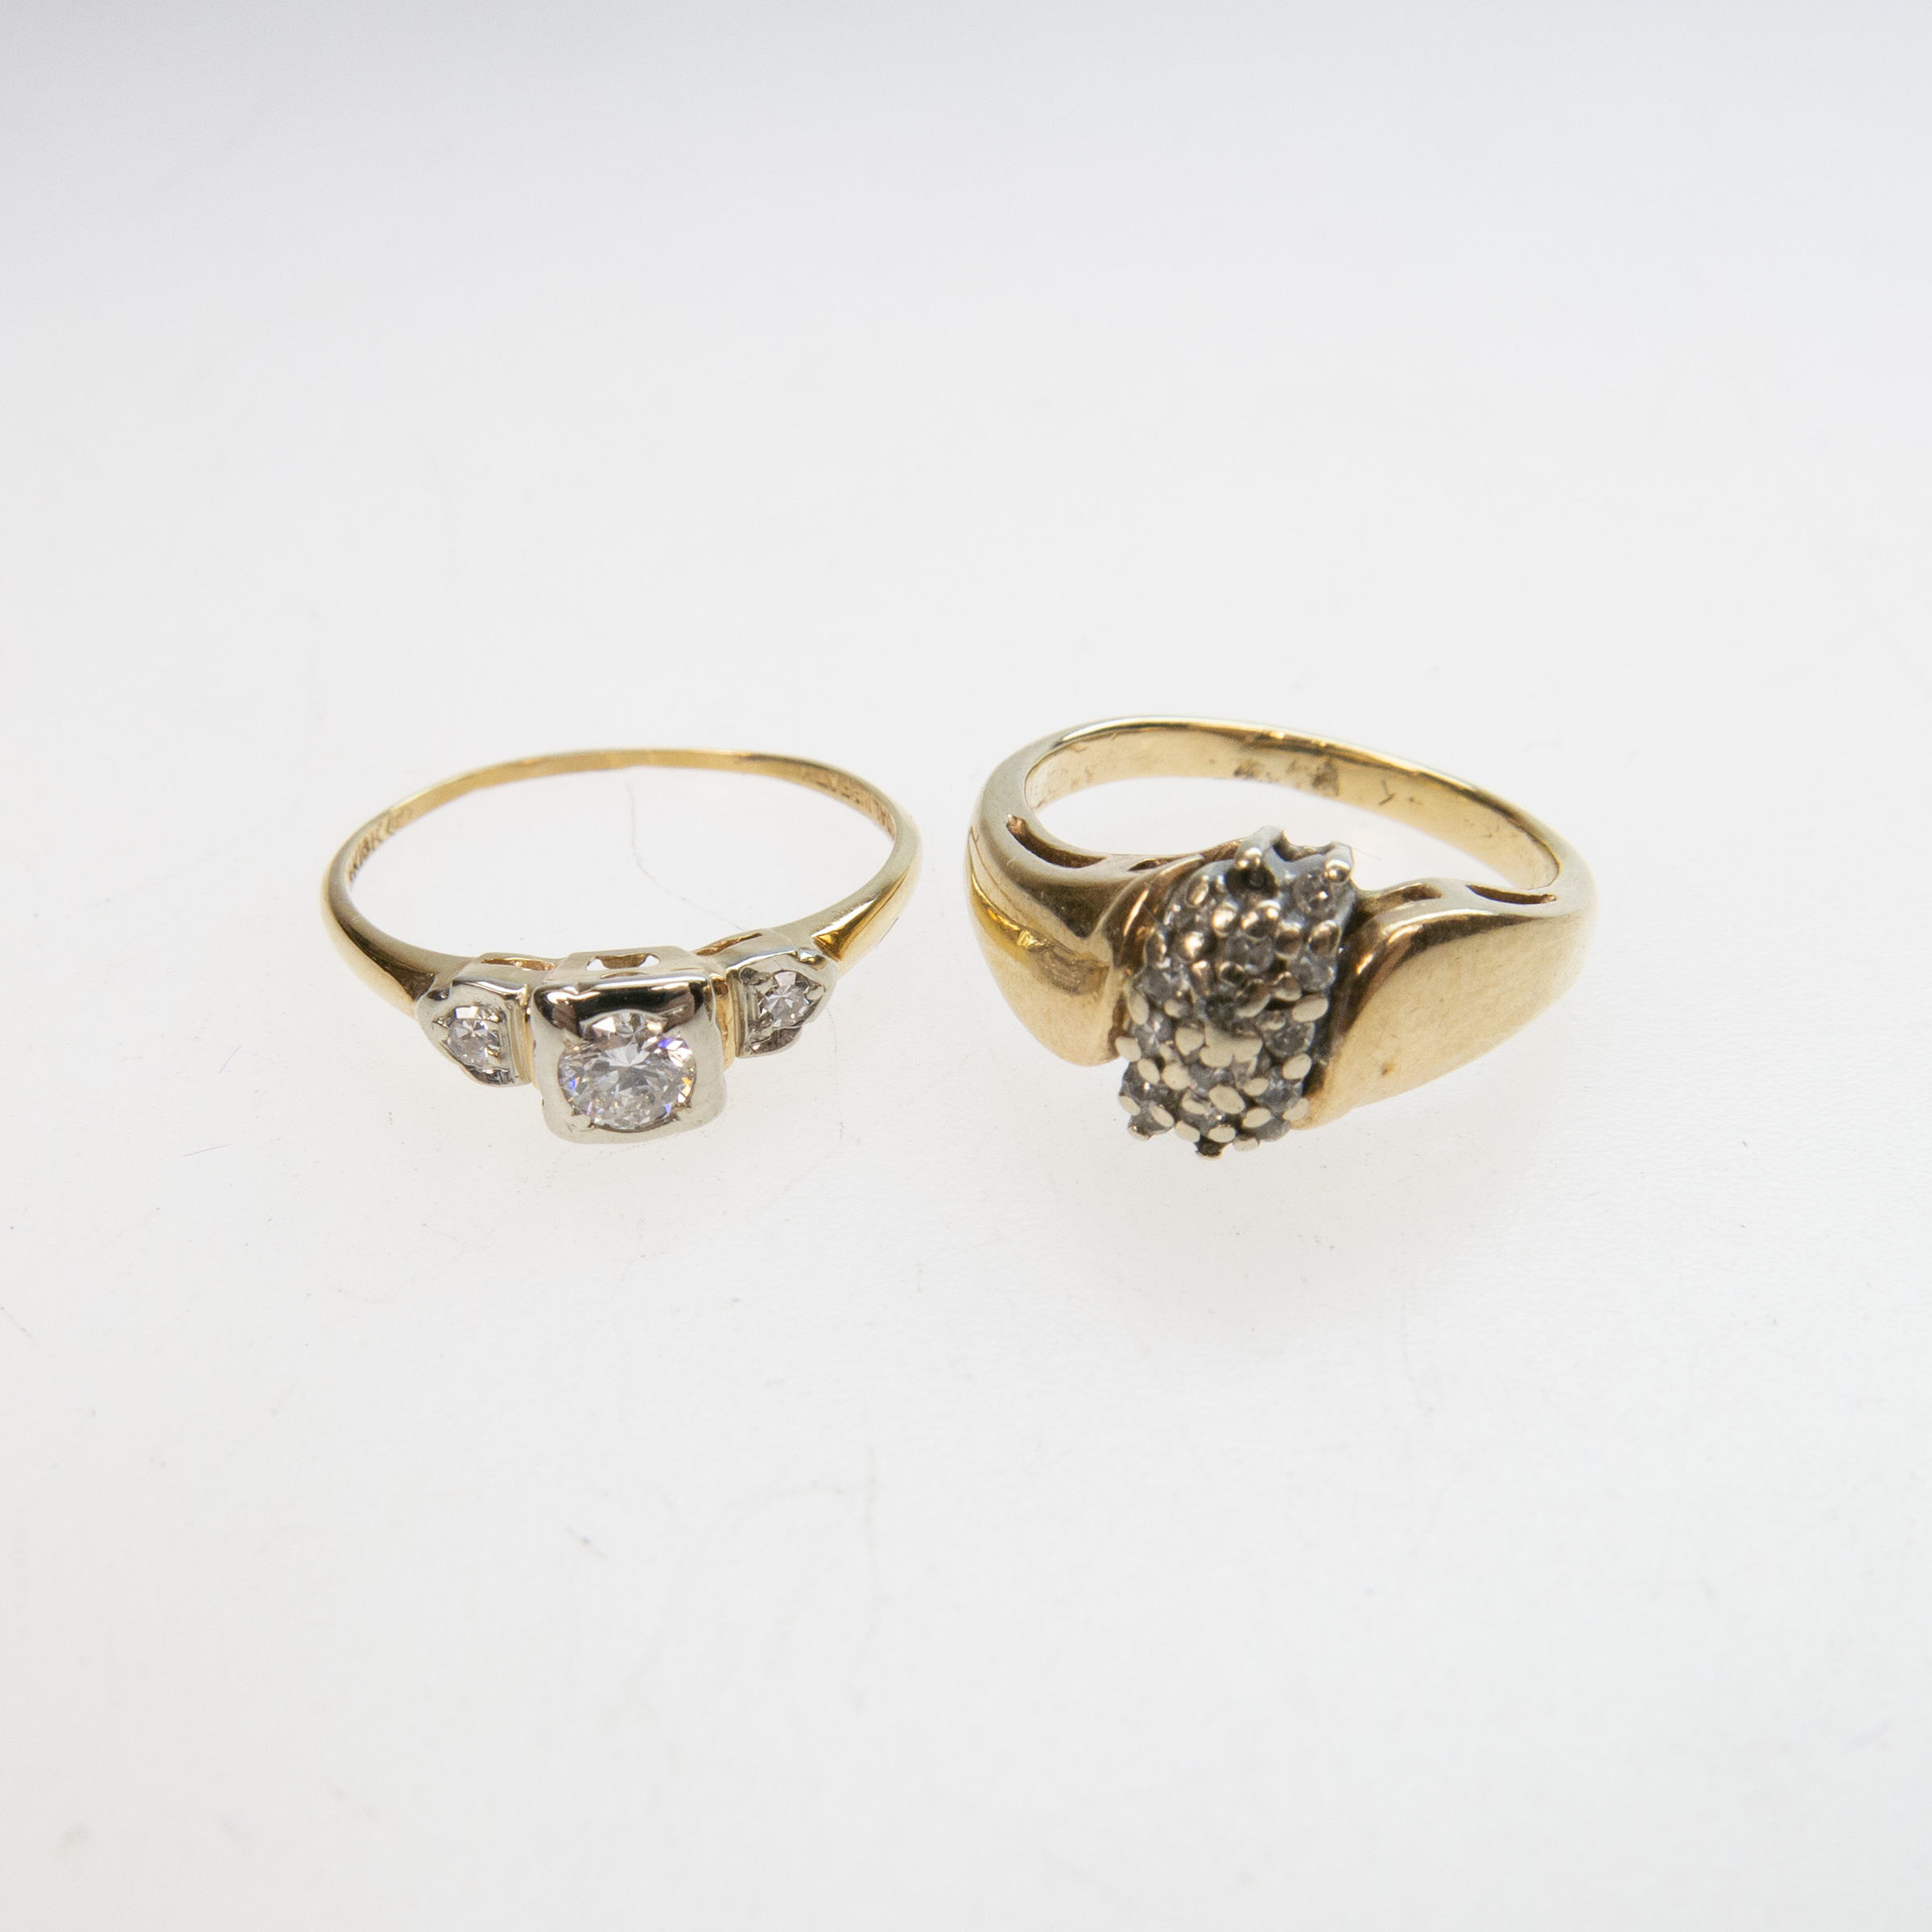 2 x 14k Yellow Gold And White Gold Rings